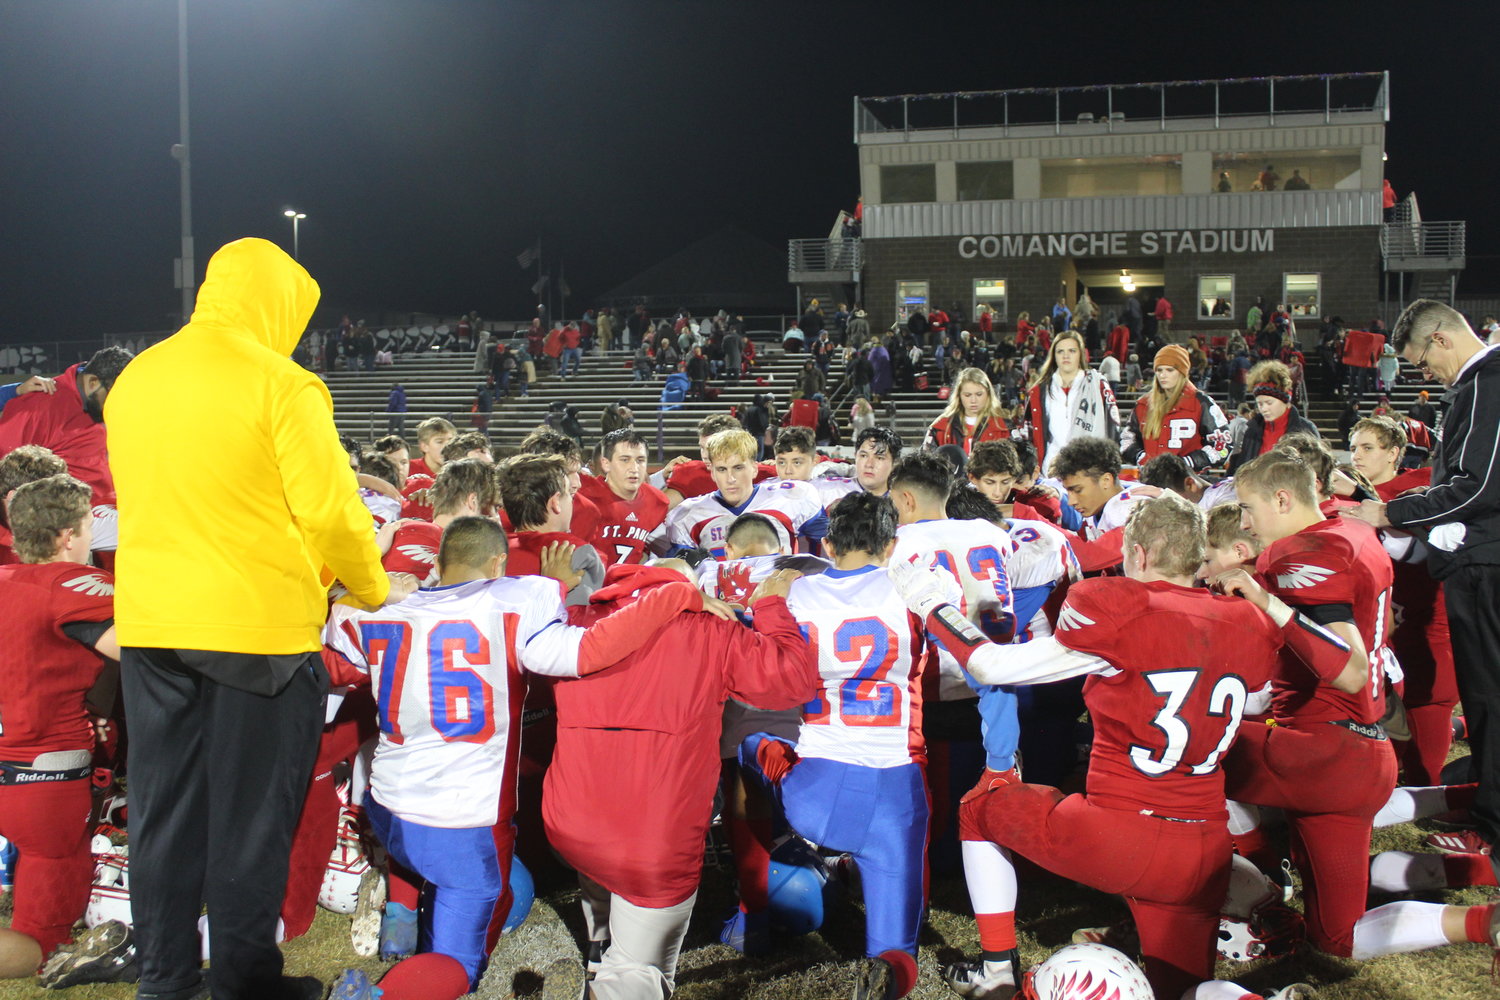 Players from both Shiner St. Paul and San Antonio St. Gerard kneel for prayer after Friday’s game at Comanche Stadium. The Cardinals came away with a 42-14 win.